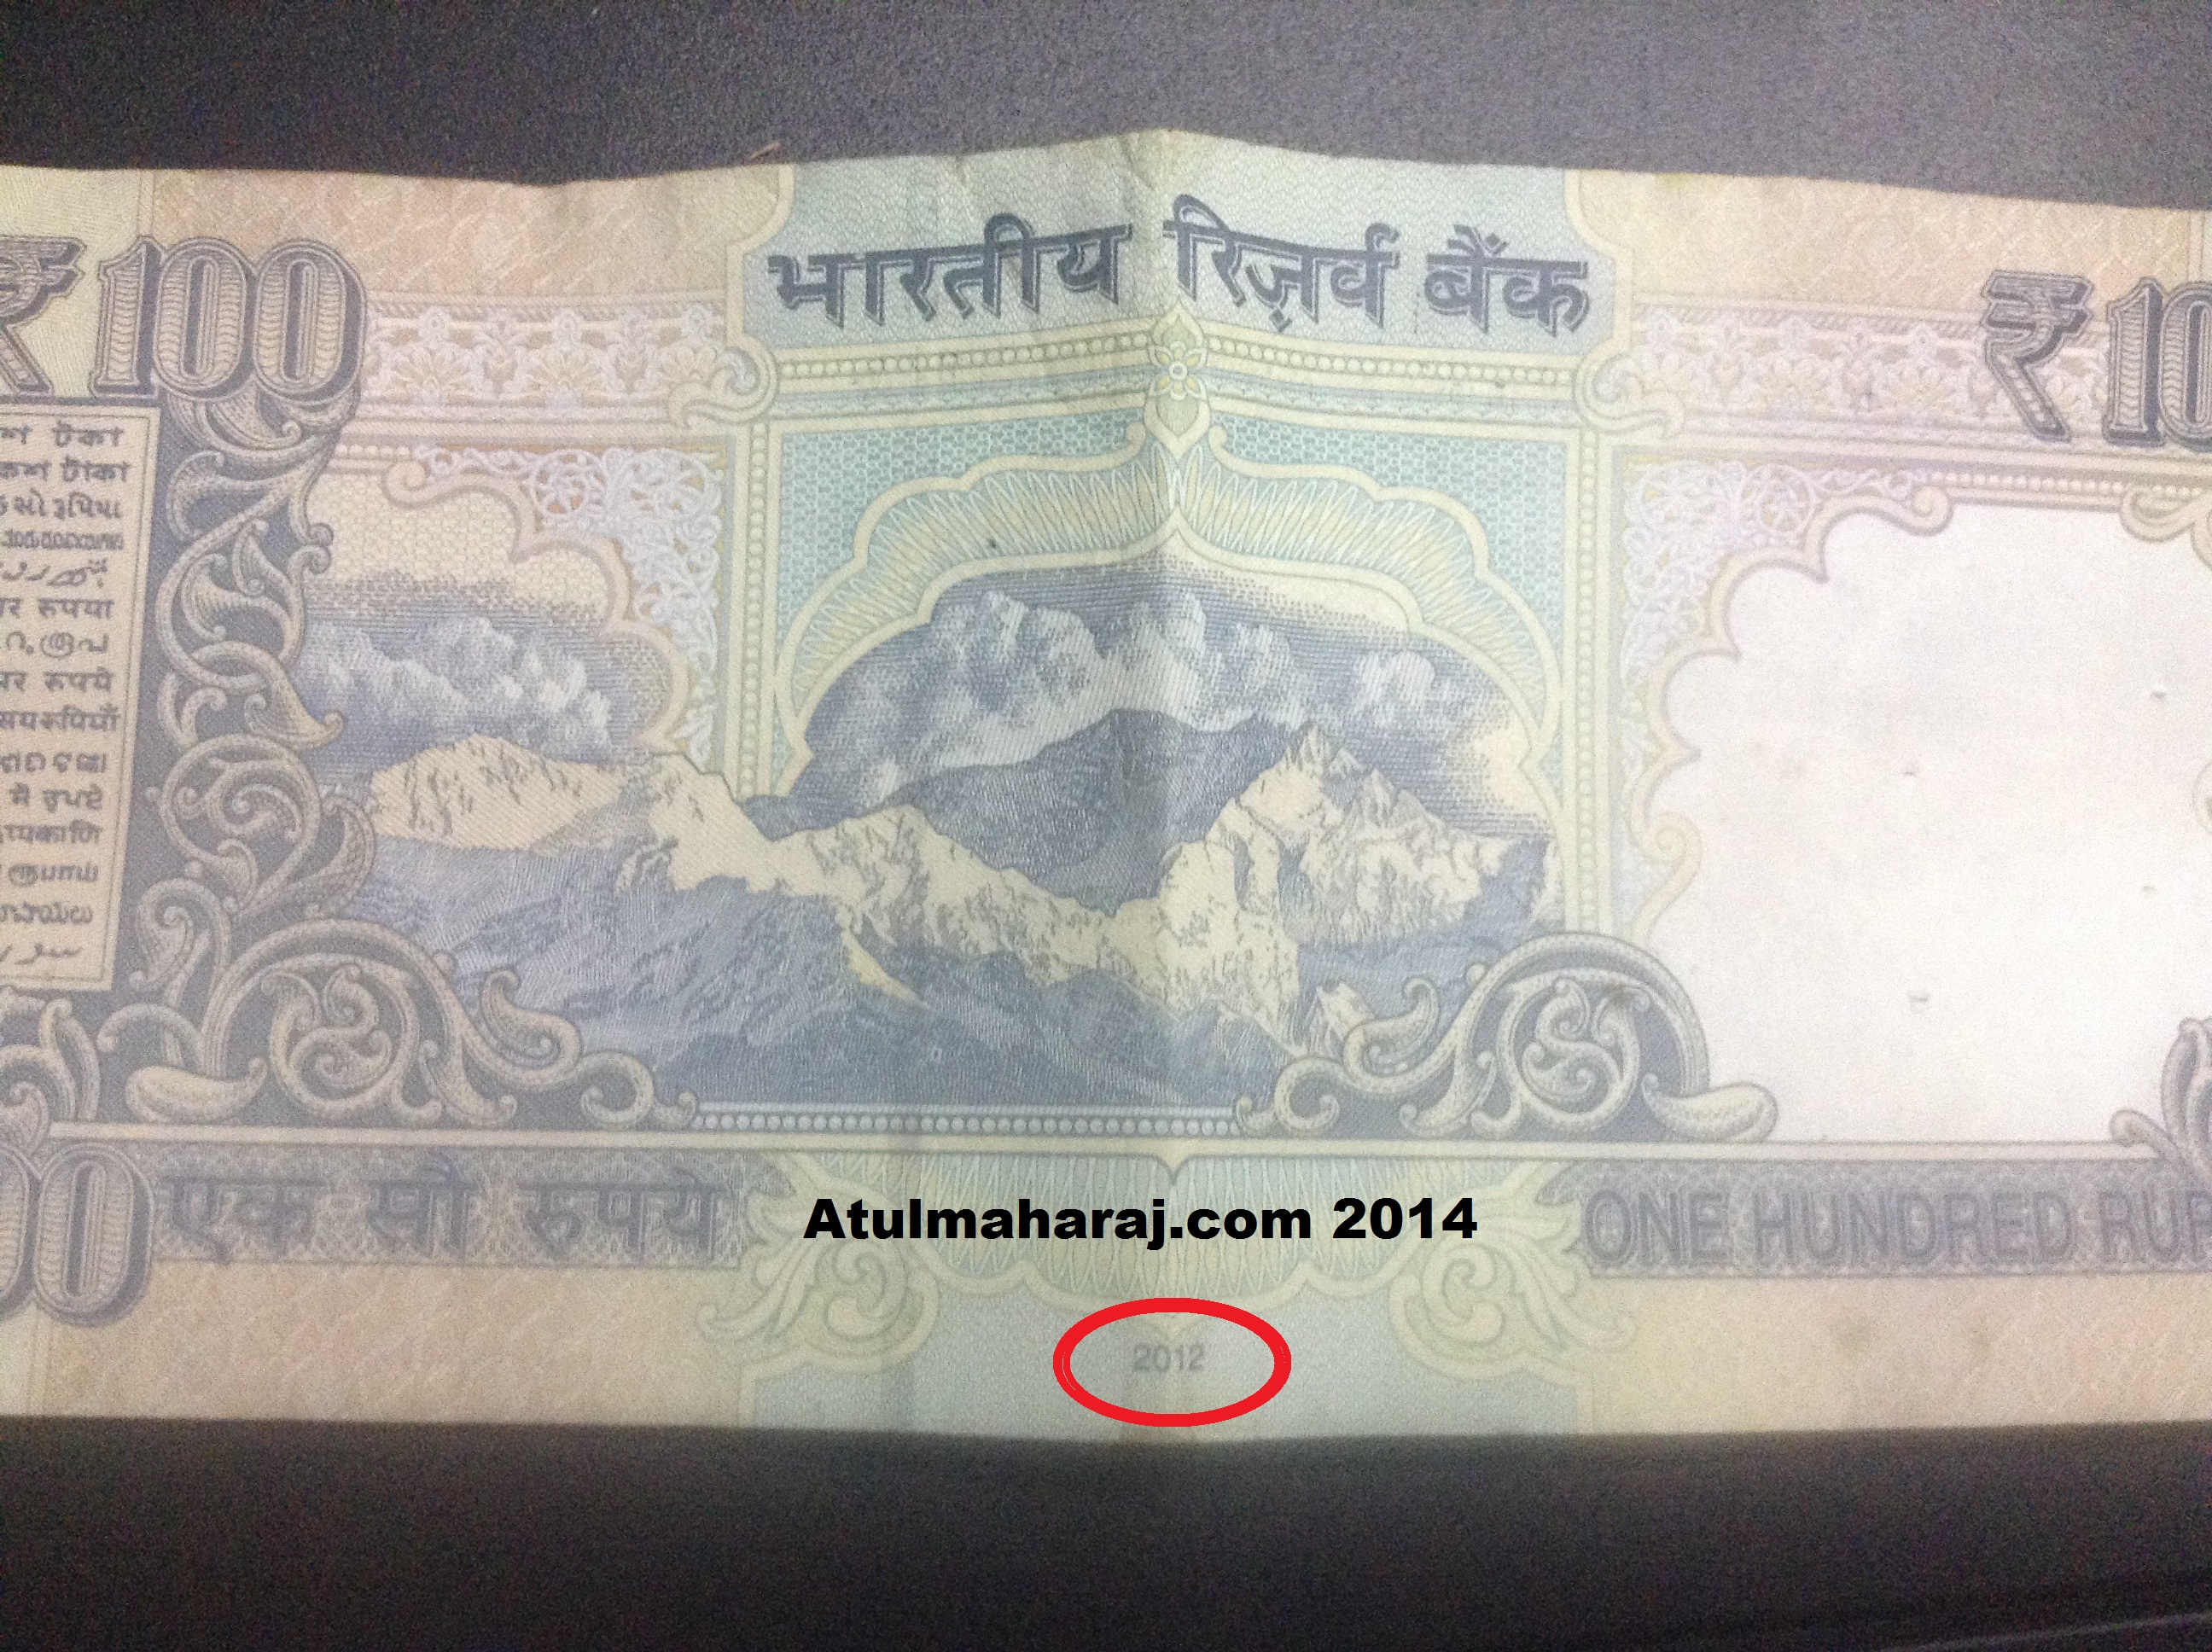 A post-2005(2012) 100Rs note.